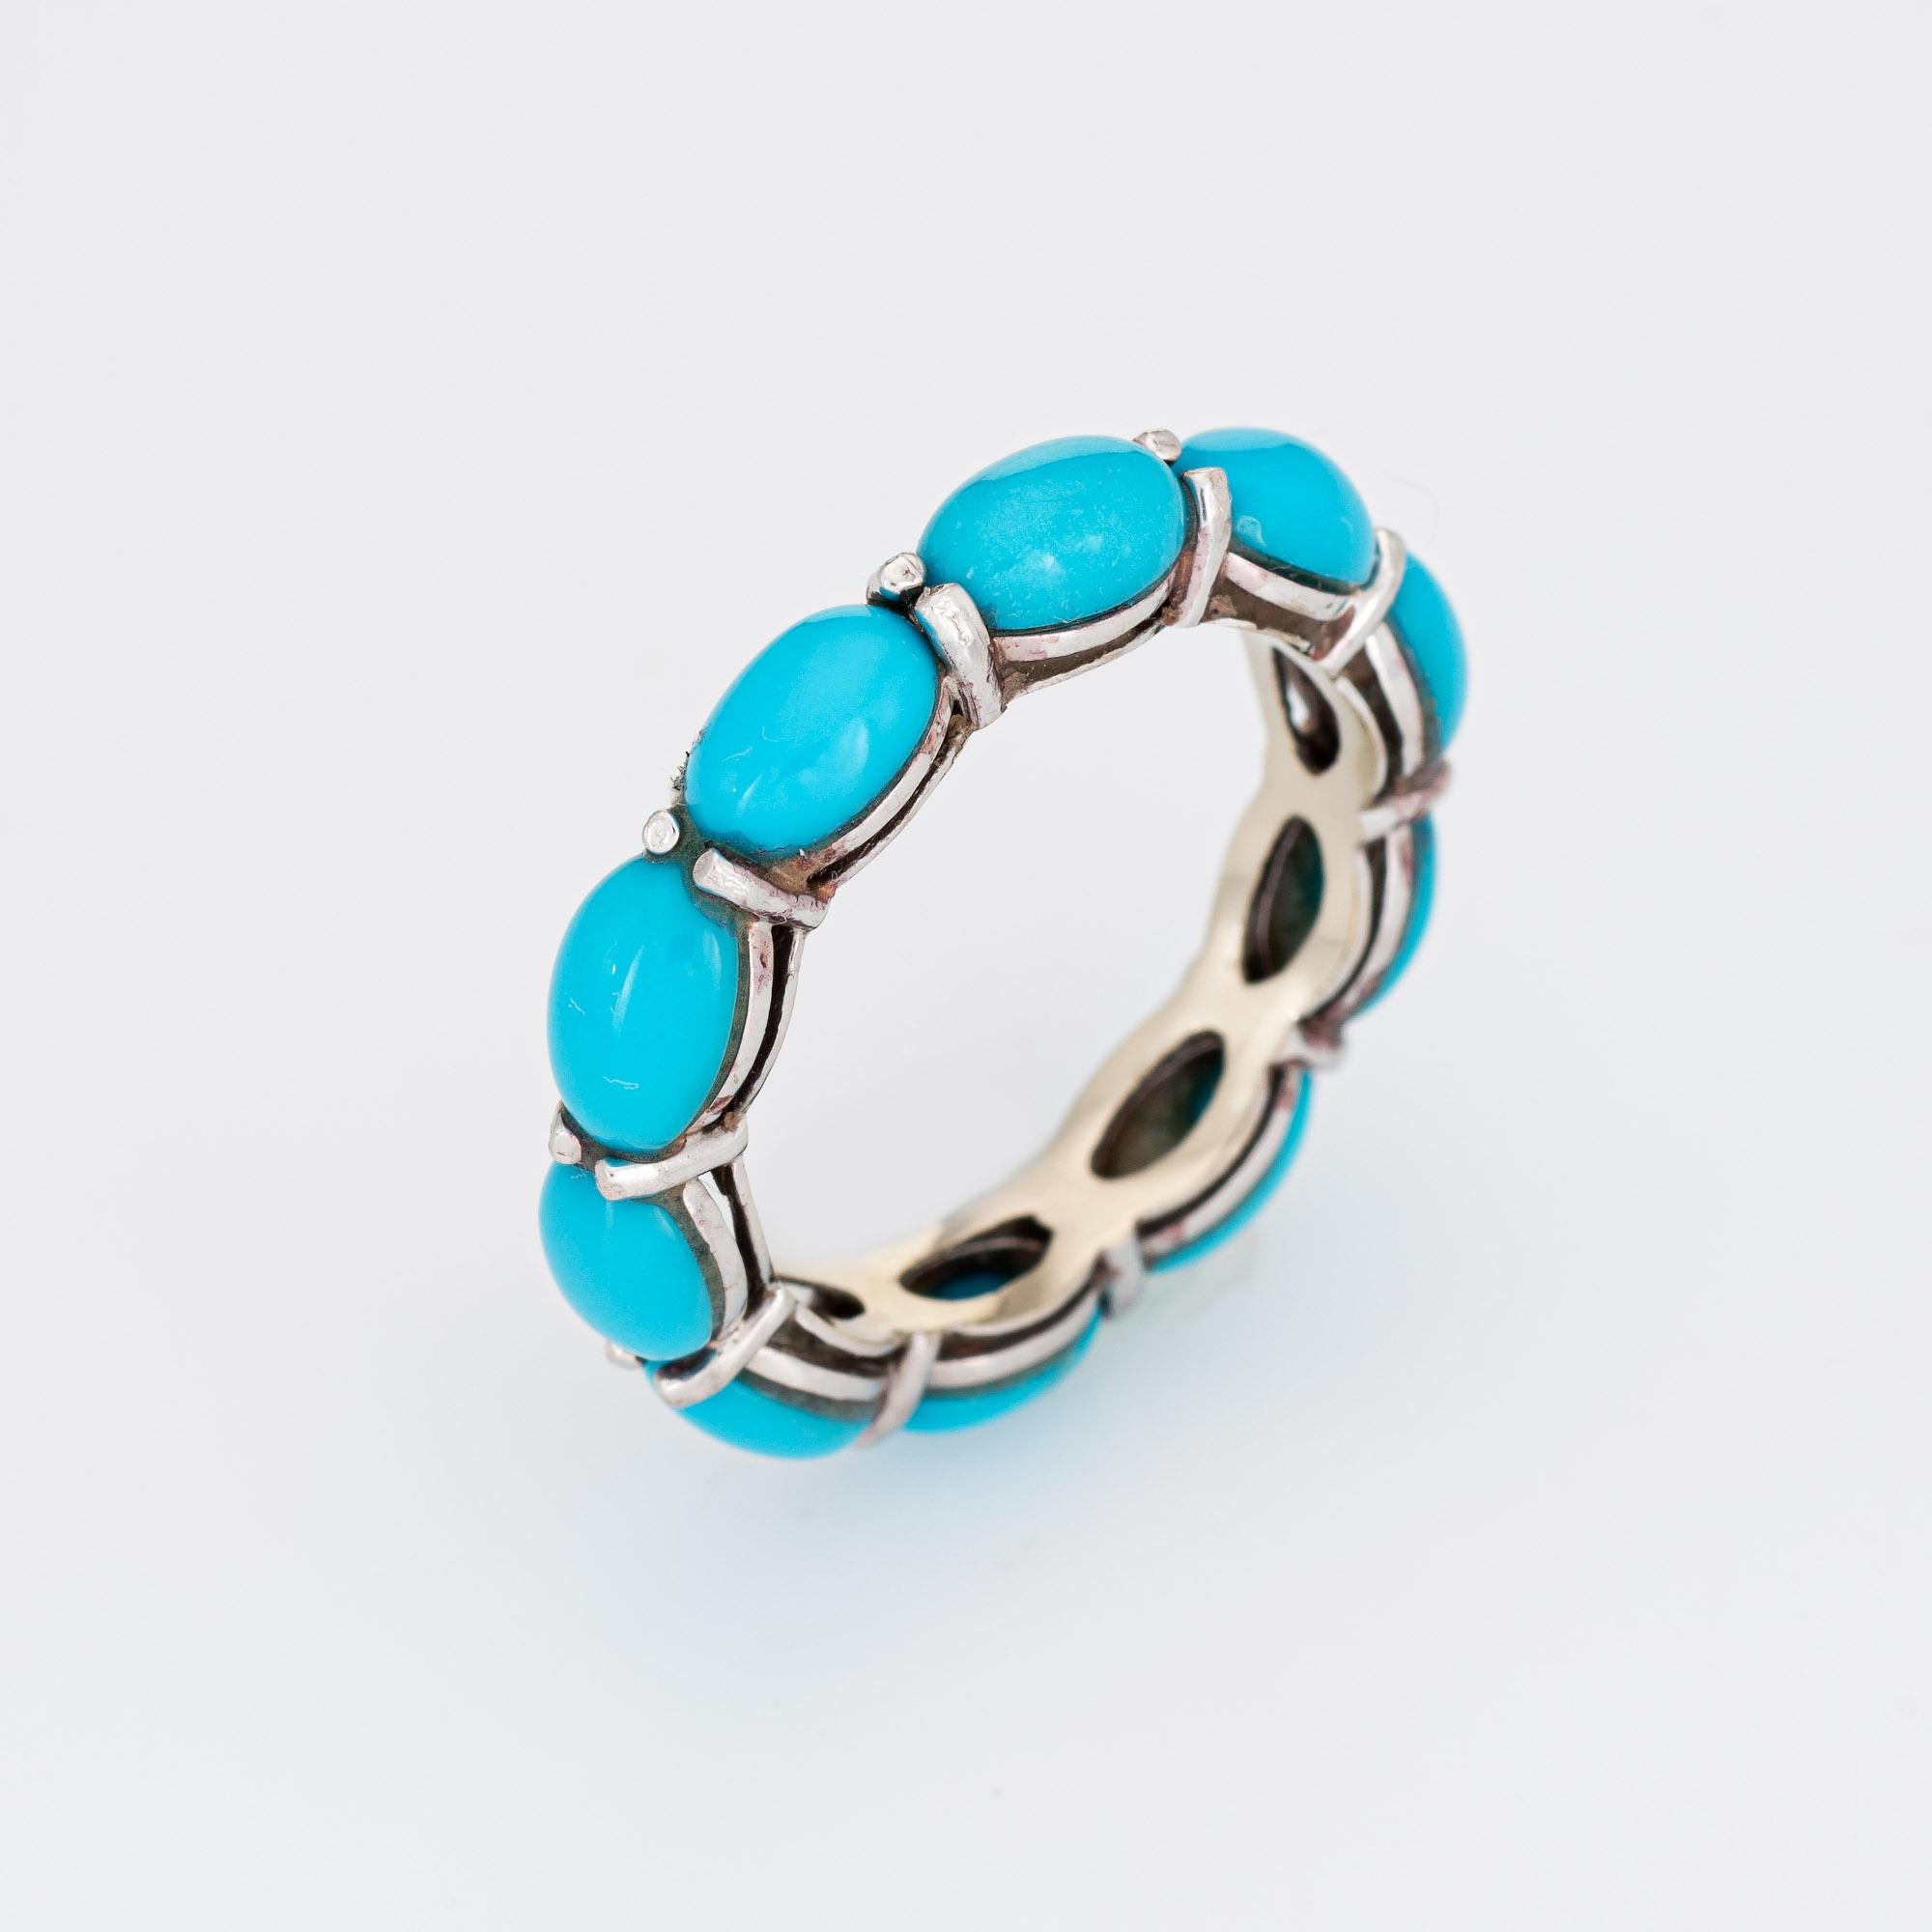 Stylish estate turquoise eternity ring crafted in 14 karat white gold. 

10 pieces of cabochon cut turquoise is estimated at 0.50 carats each and total an estimated 5 carats. The turquoise is in excellent condition and free of cracks or chips. 

The